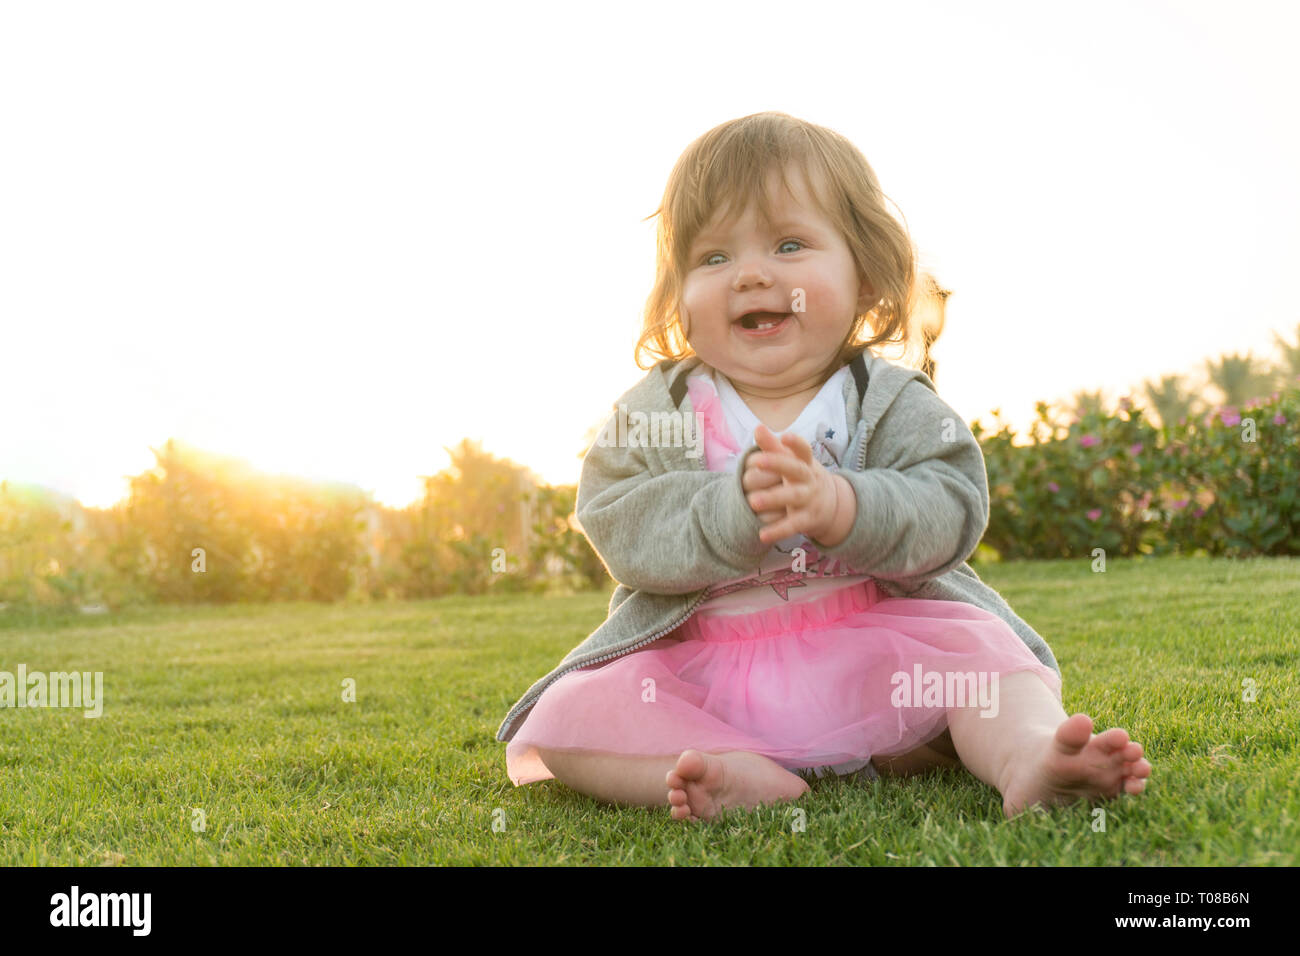 Little funny baby girl sitting on the grass Stock Photo